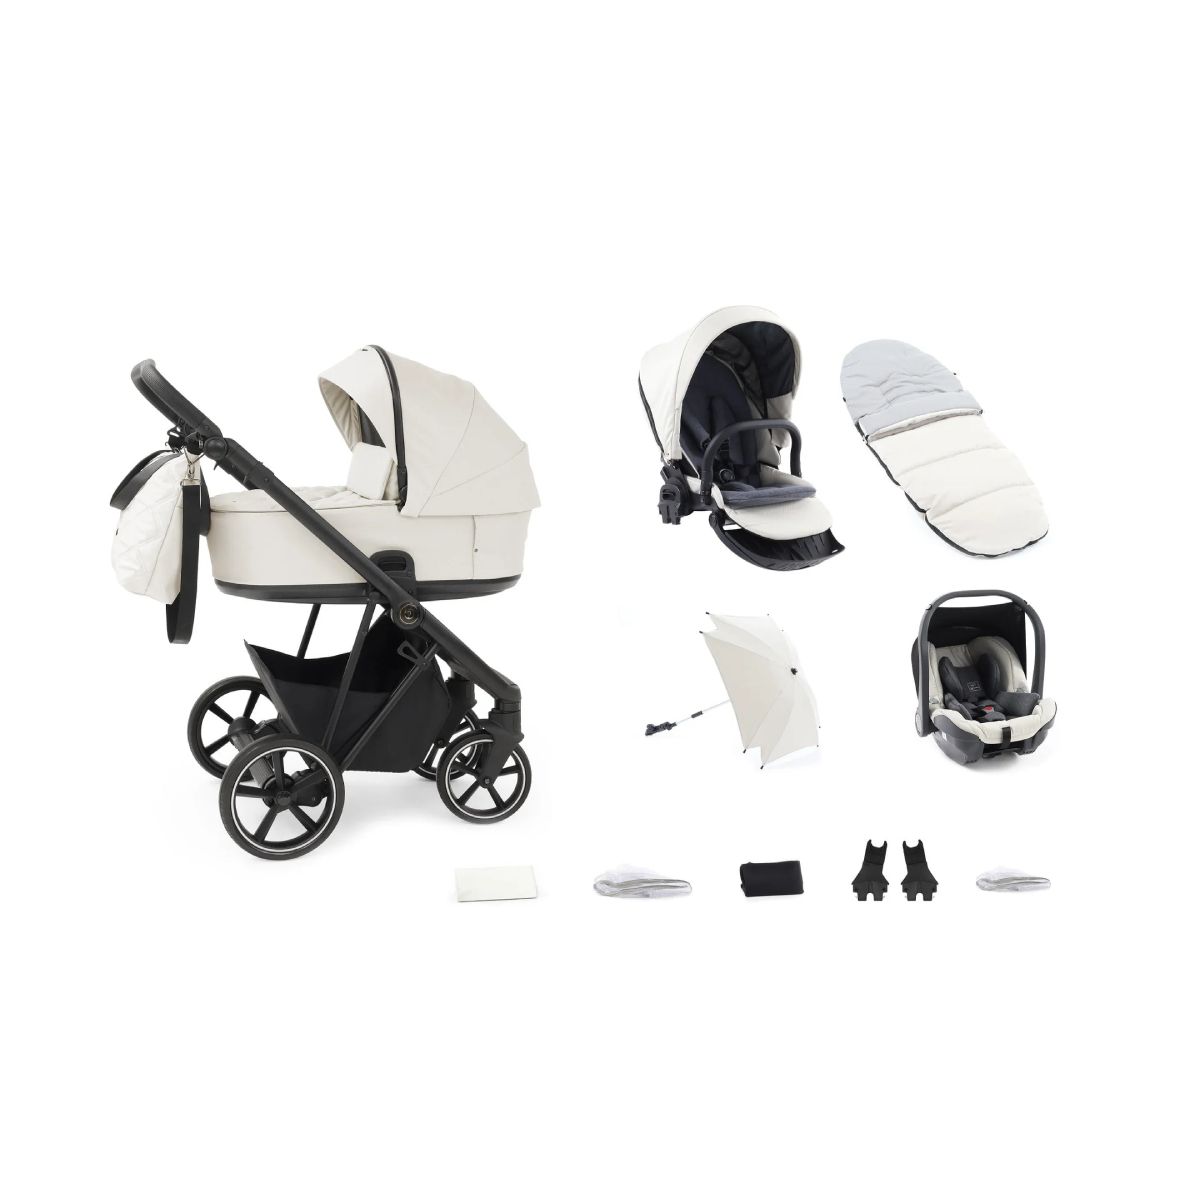 Babystyle Prestige with Vogue Chassis 12 Piece Bundle